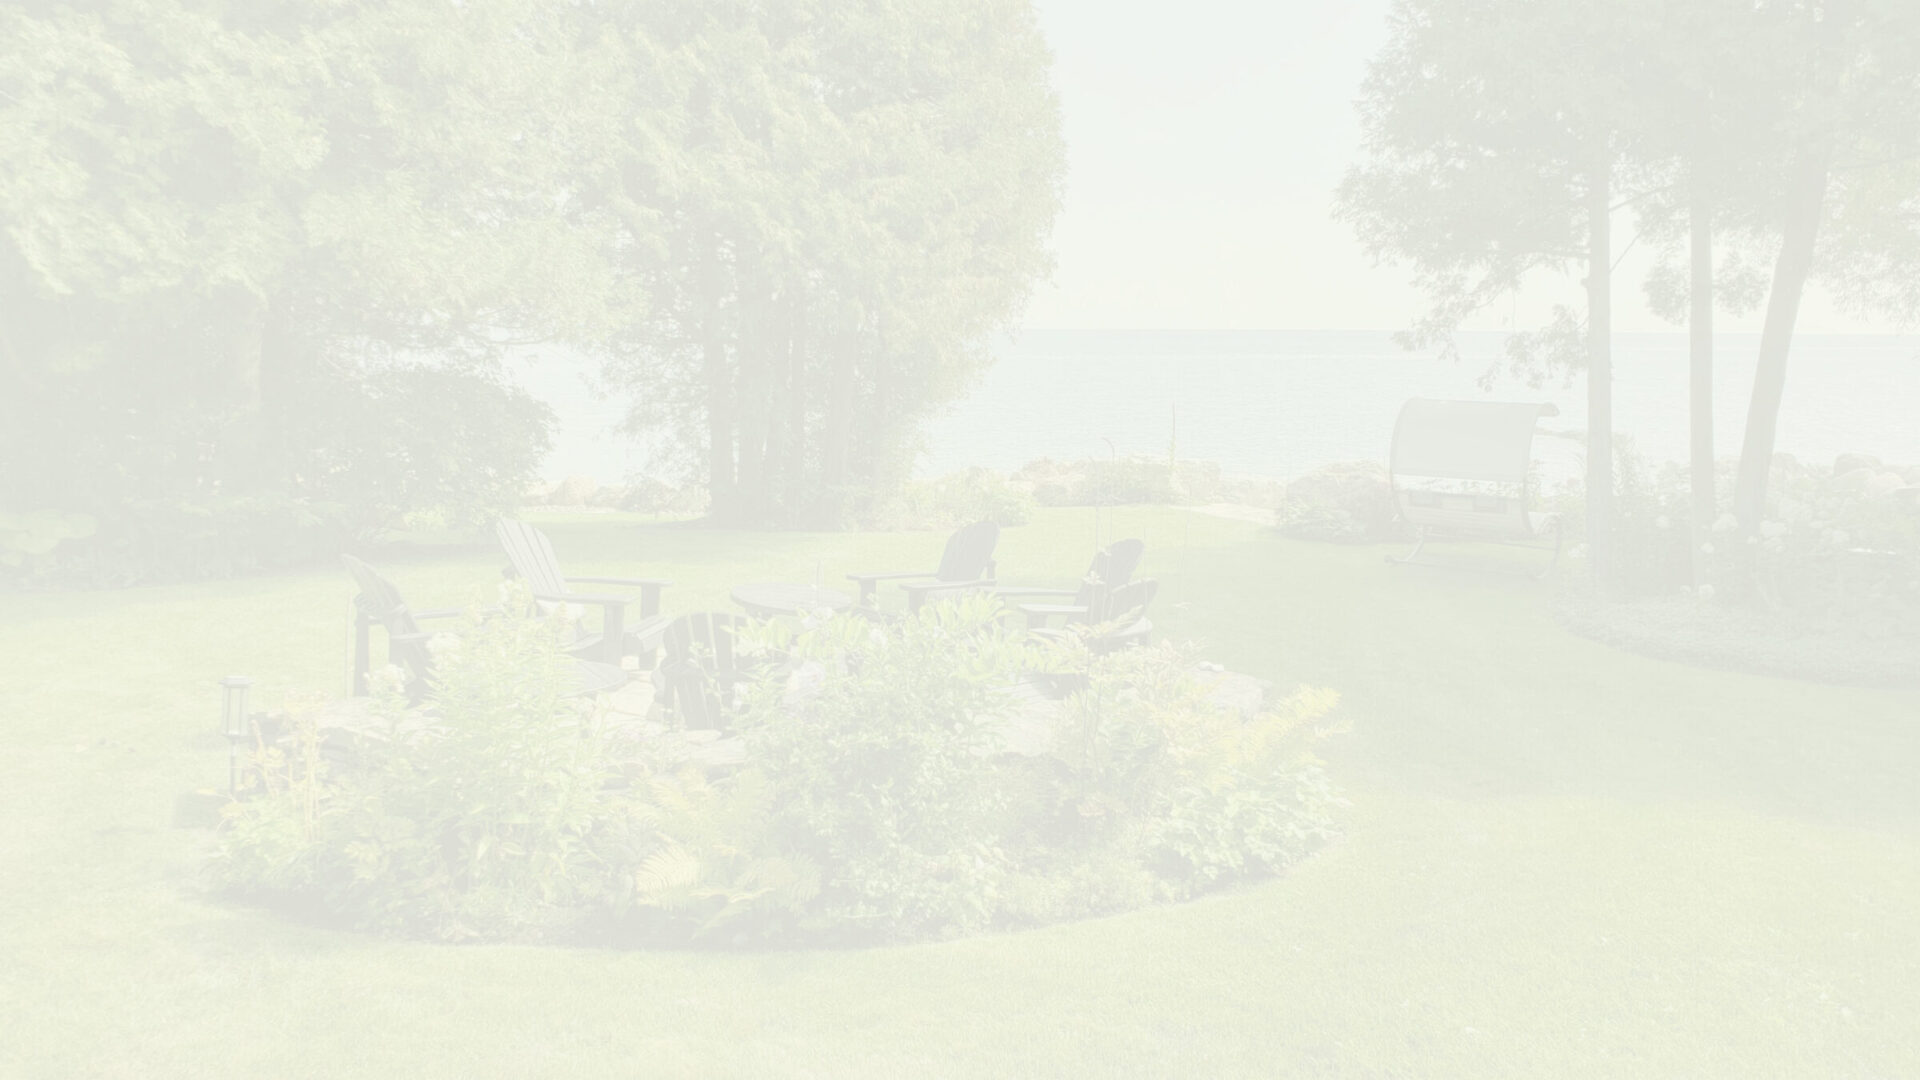 The image is overexposed, showing a serene lakeside garden with Adirondack chairs, a swing, trees, flowers, and lush green grass in bright daylight.